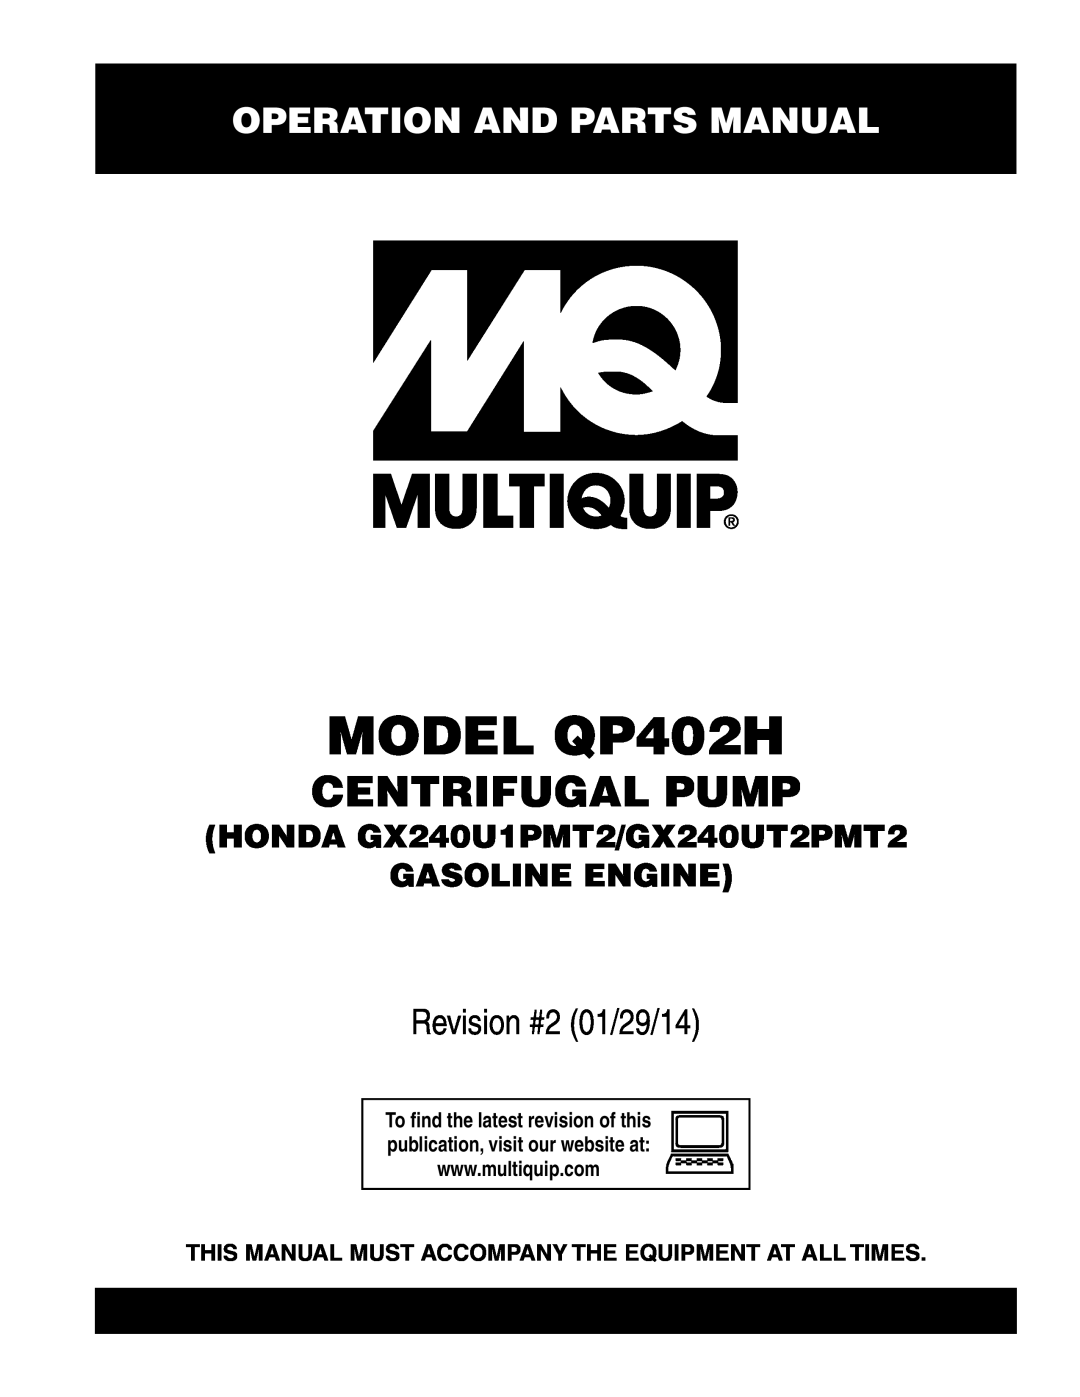 Multiquip qp402h manual Operation And Parts Manual, MODEL QP402H, Centrifugal Pump, Revision #2 01/29/14 